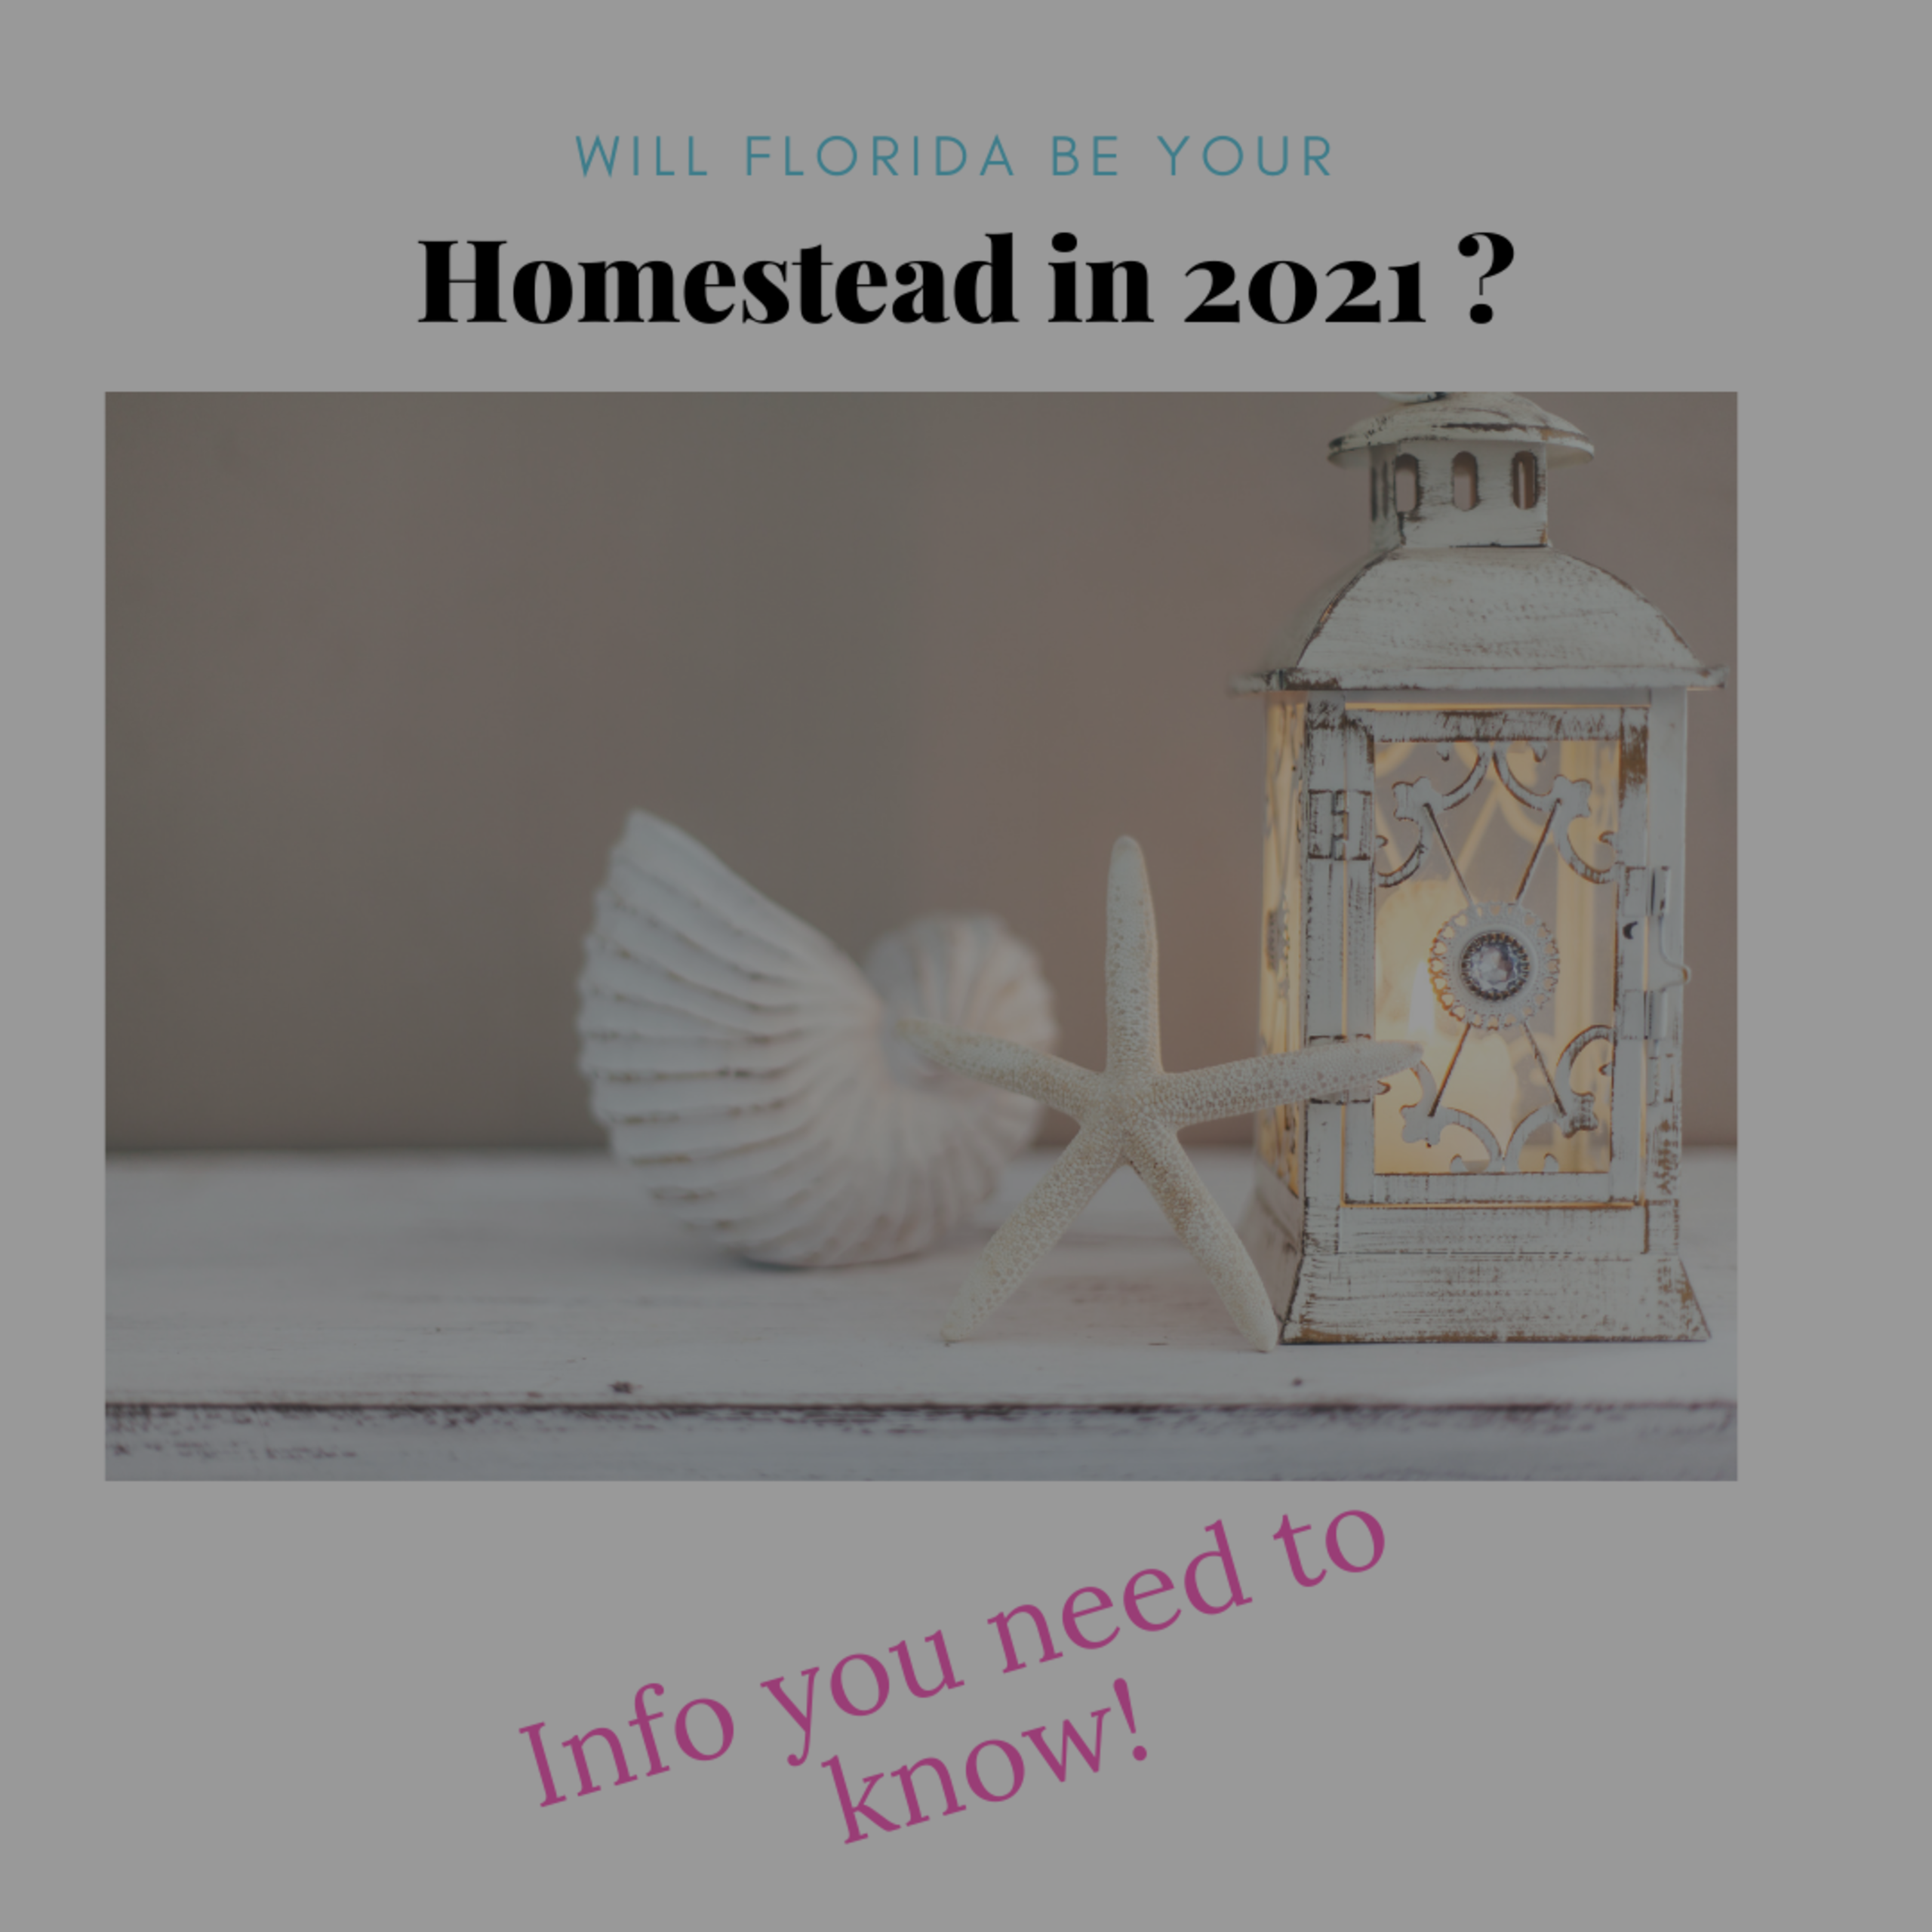 Purchase before January 1st to claim the Florida Homestead Exemption